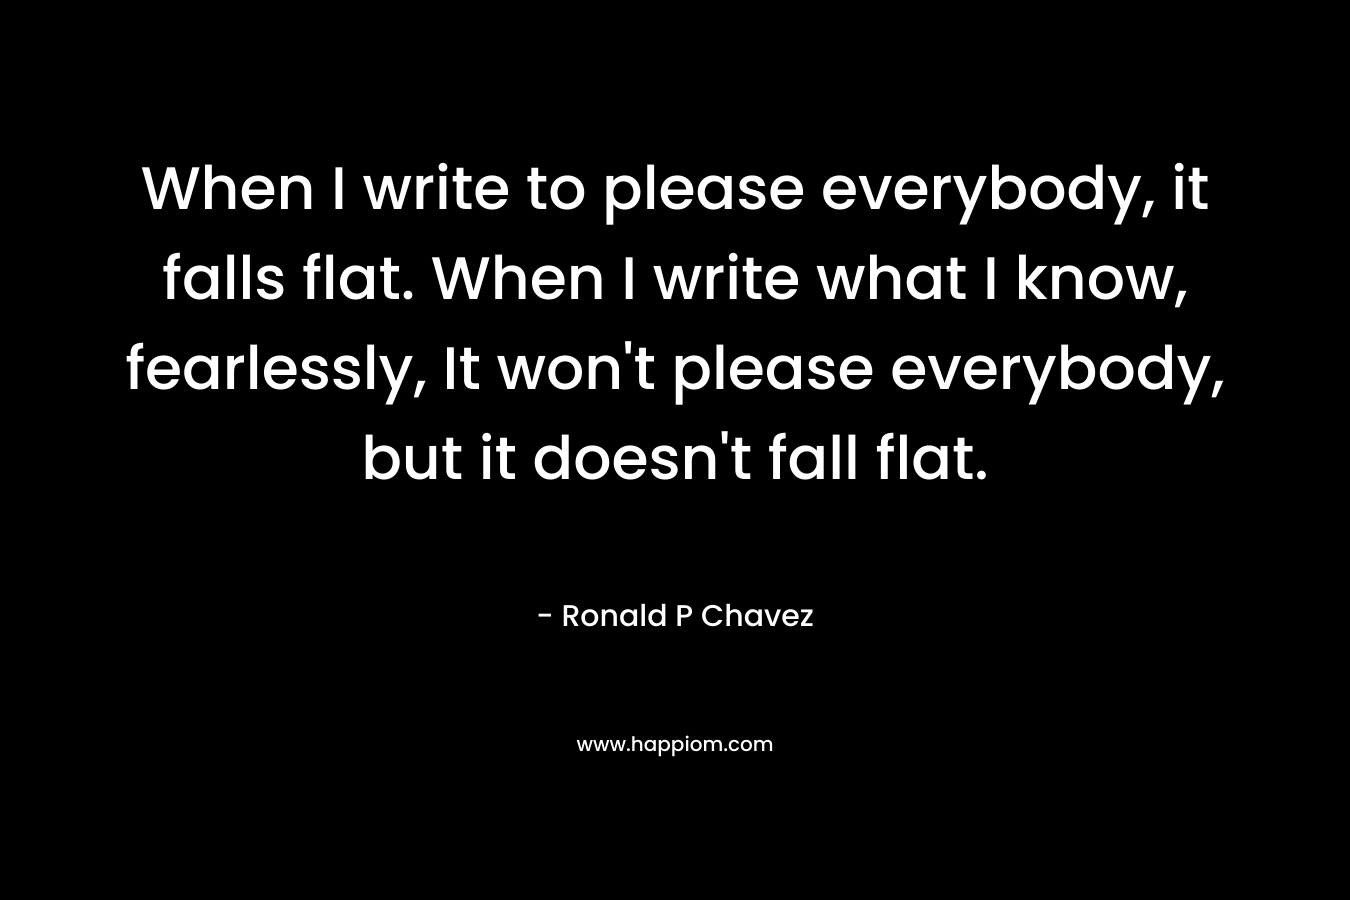 When I write to please everybody, it falls flat. When I write what I know, fearlessly, It won't please everybody, but it doesn't fall flat.